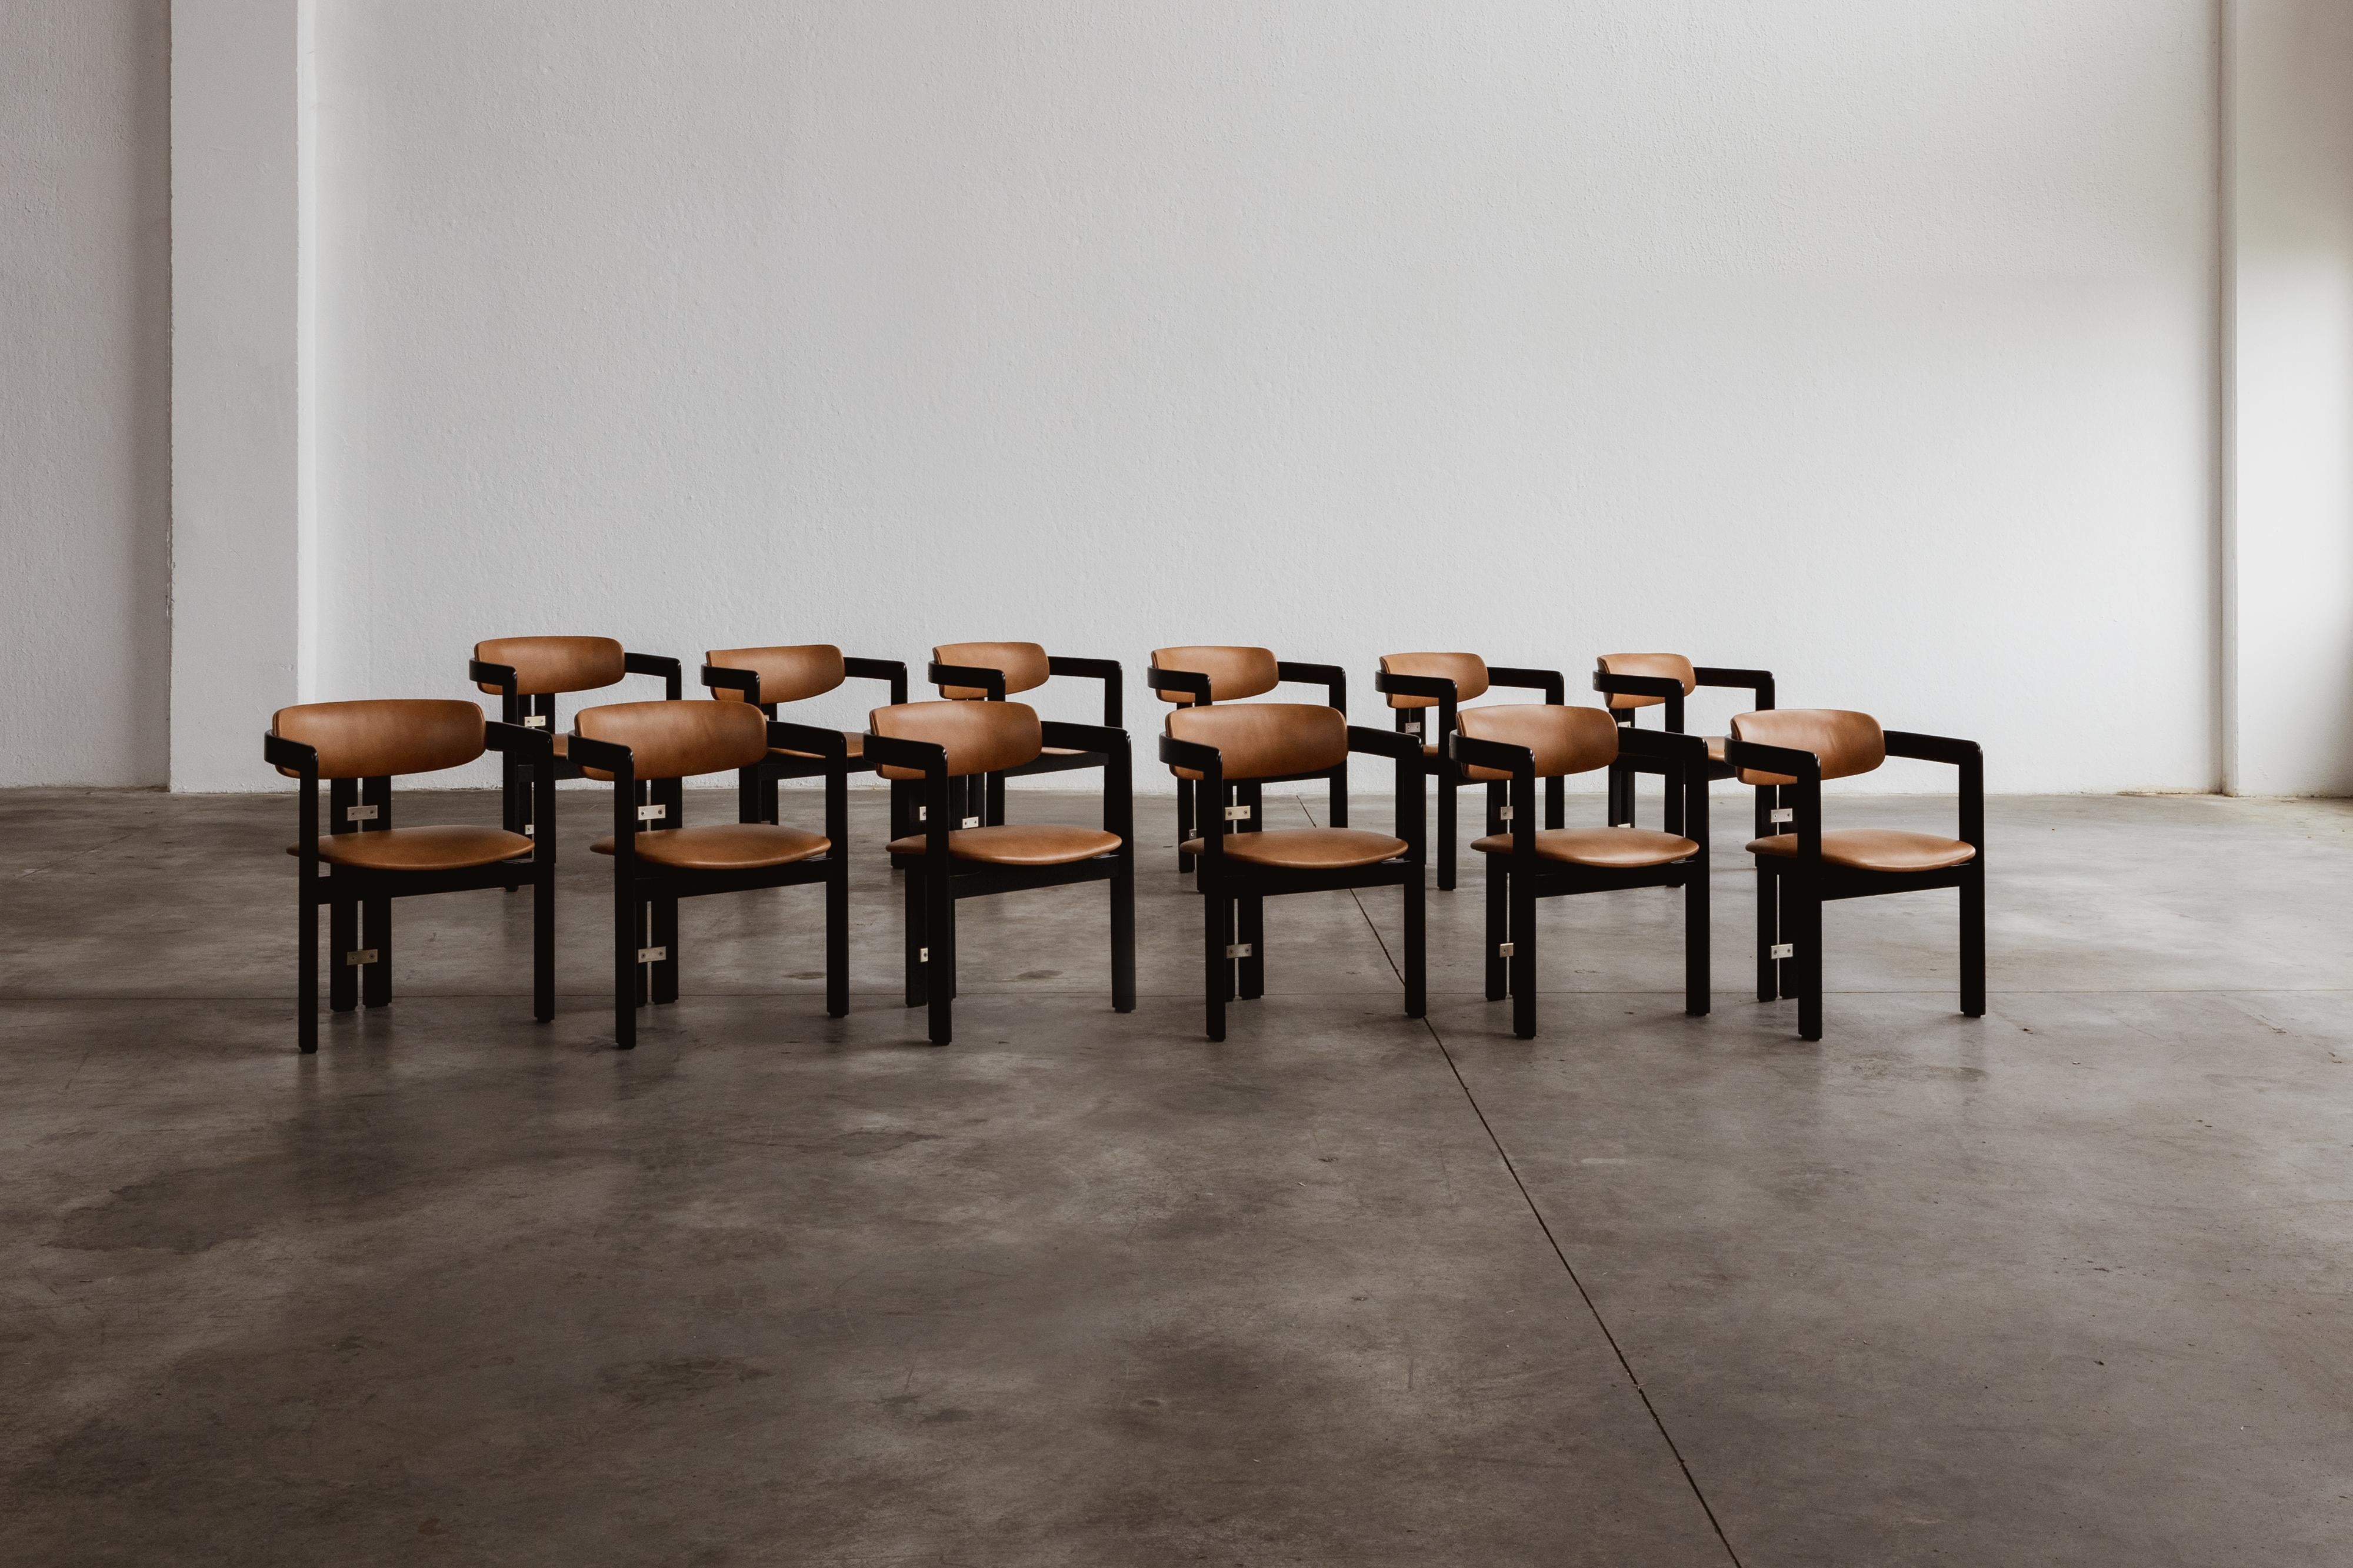 Augusto Savini “Pamplona” dining chairs for Pozzi, black framework and ranch leather, Italy, 1965, set of twelve.

In the realm of Italian craftsmanship, the Pamplona chairs by Augusto Savini for Pozzi stand as a symbol of architectural elegance.